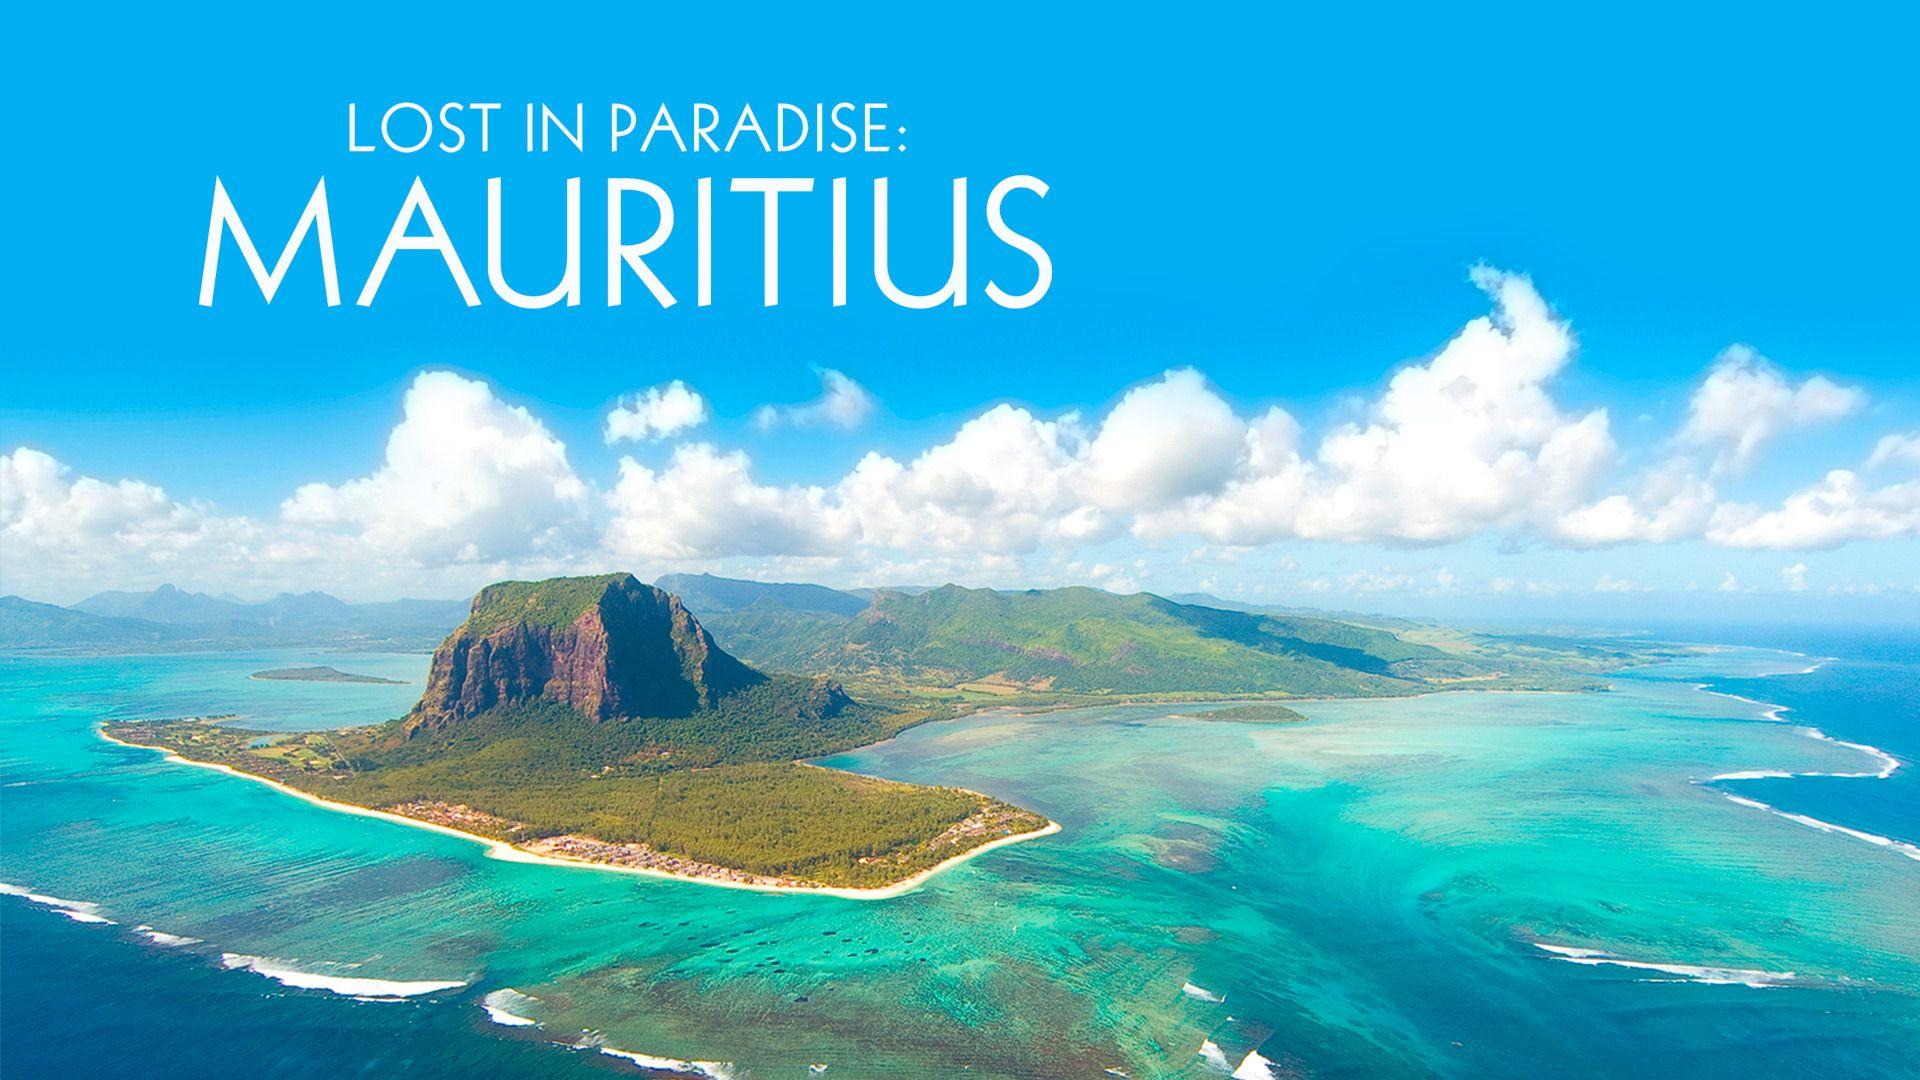 Mauritius Wallpapers High Quality